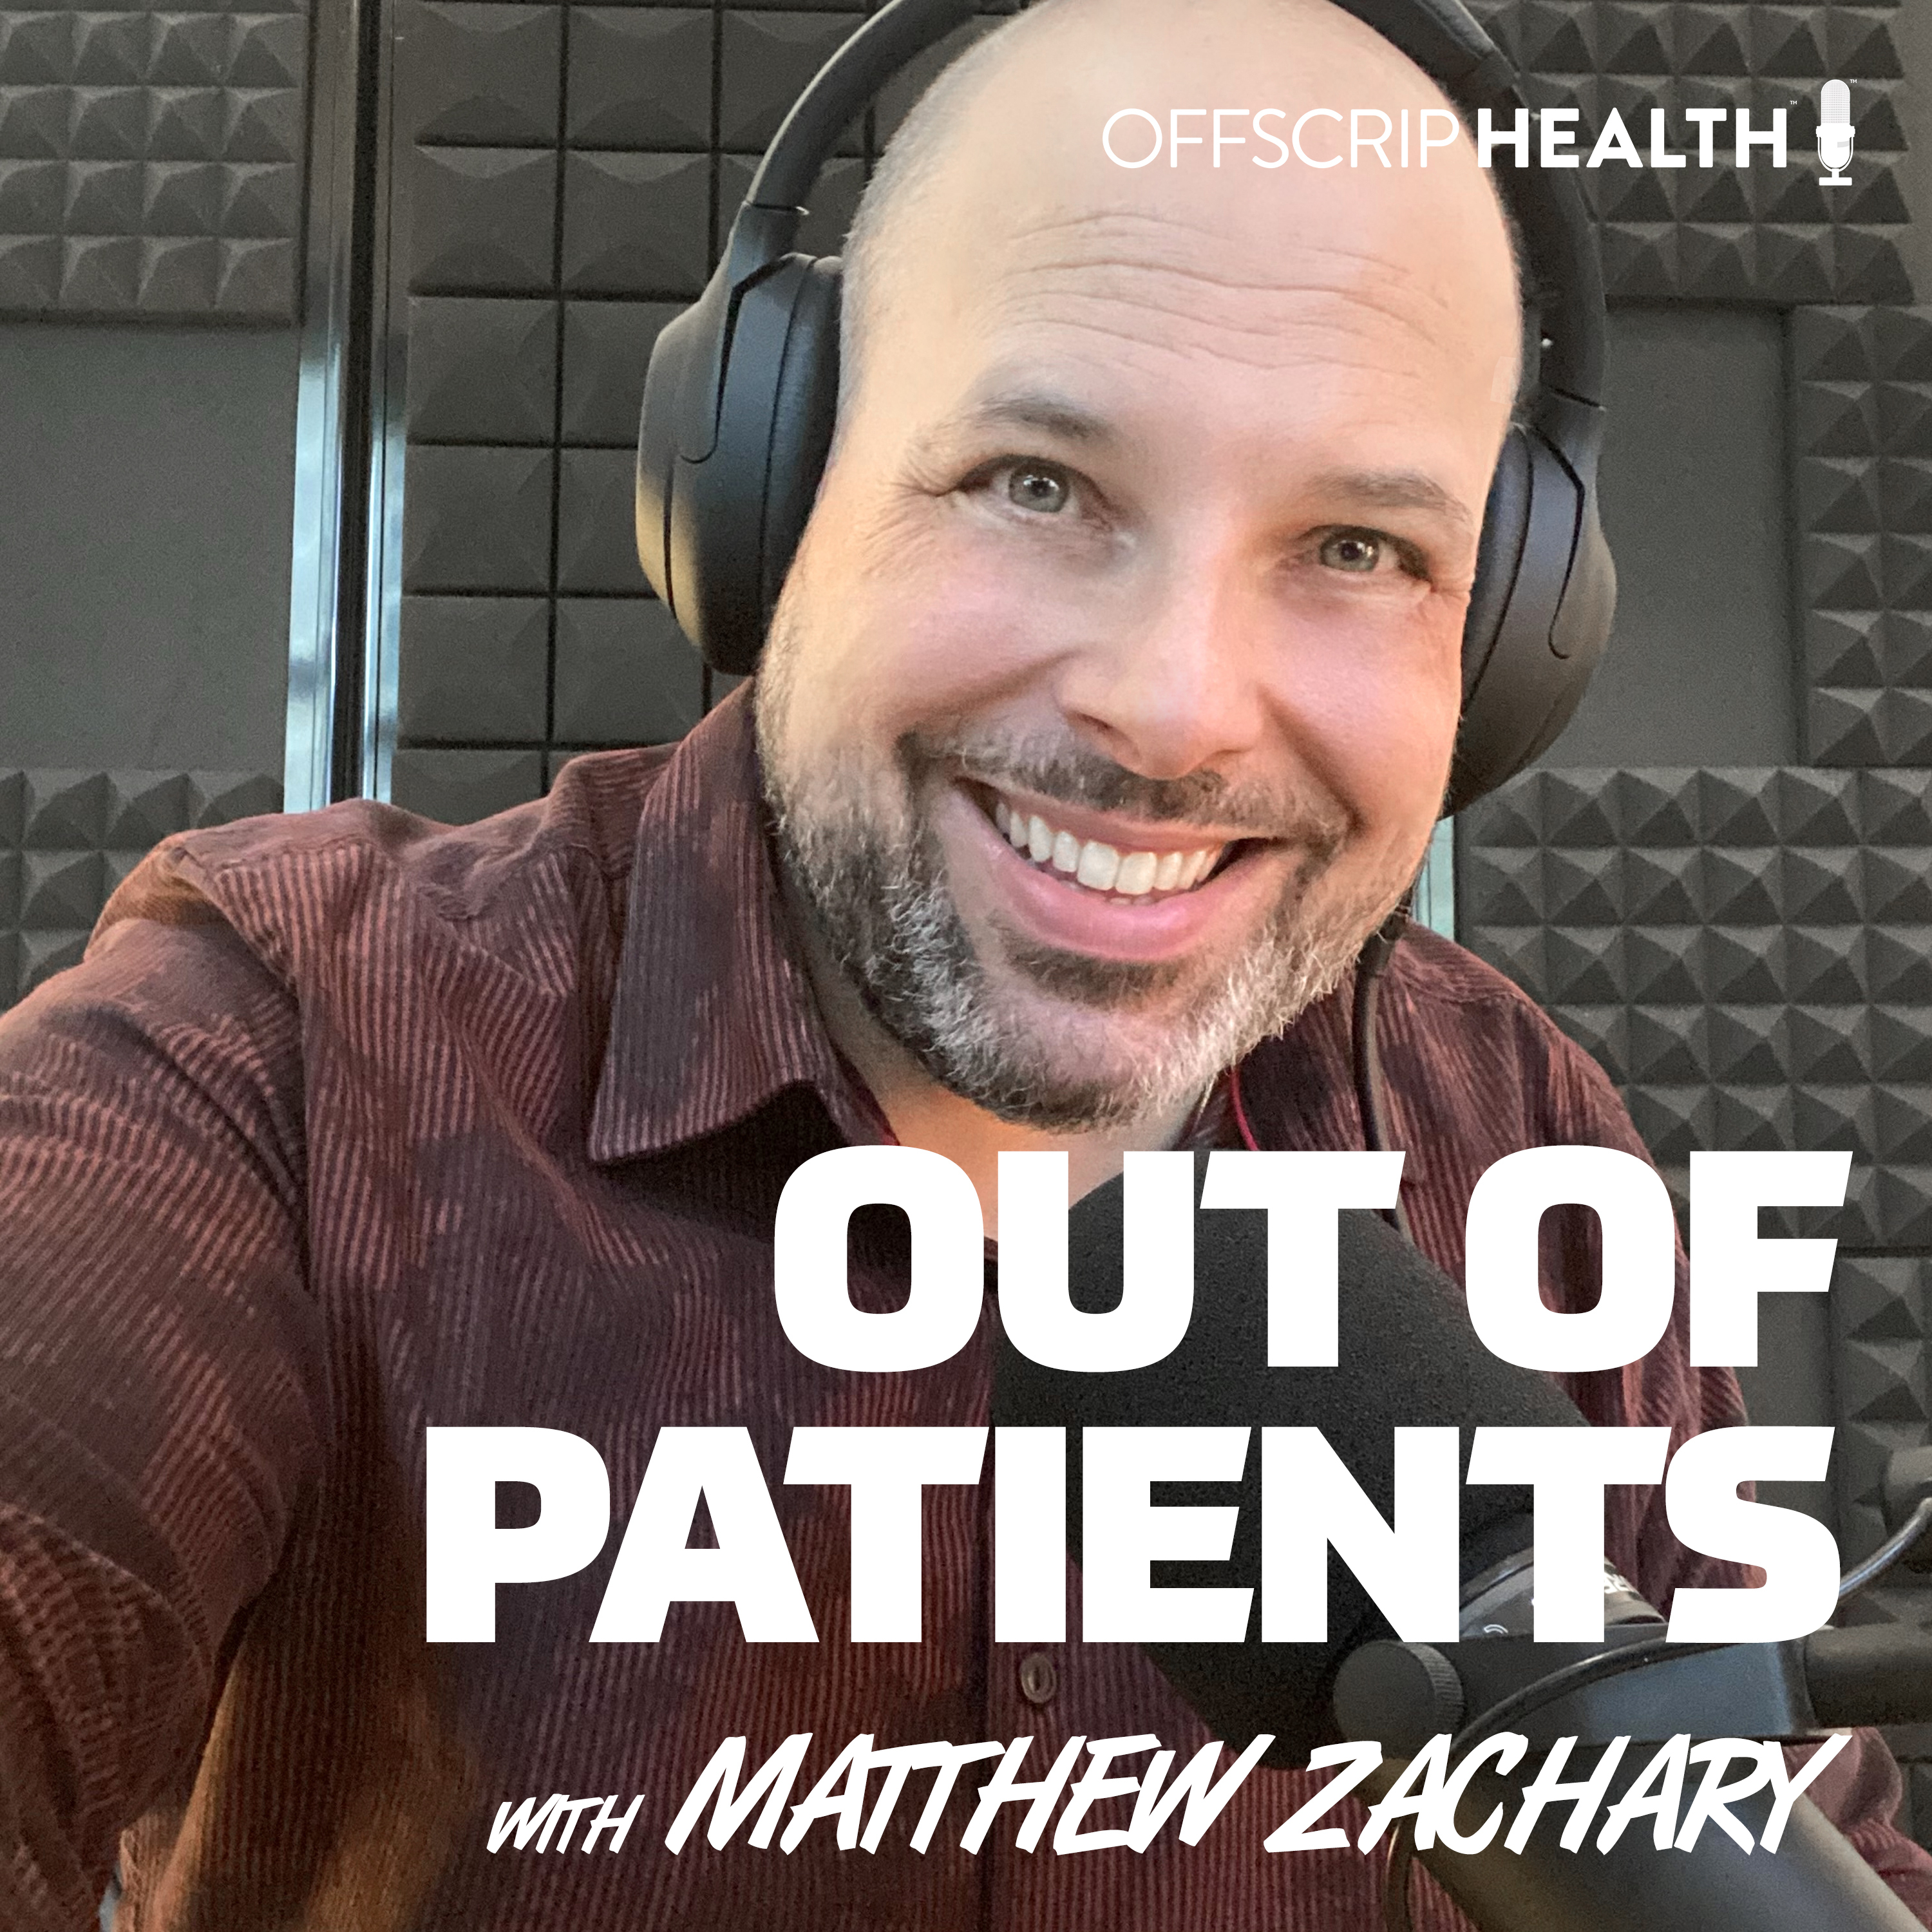 [THROWBACK] Pay the Patients: It's Time to Compen$ate Patients for Their Experience